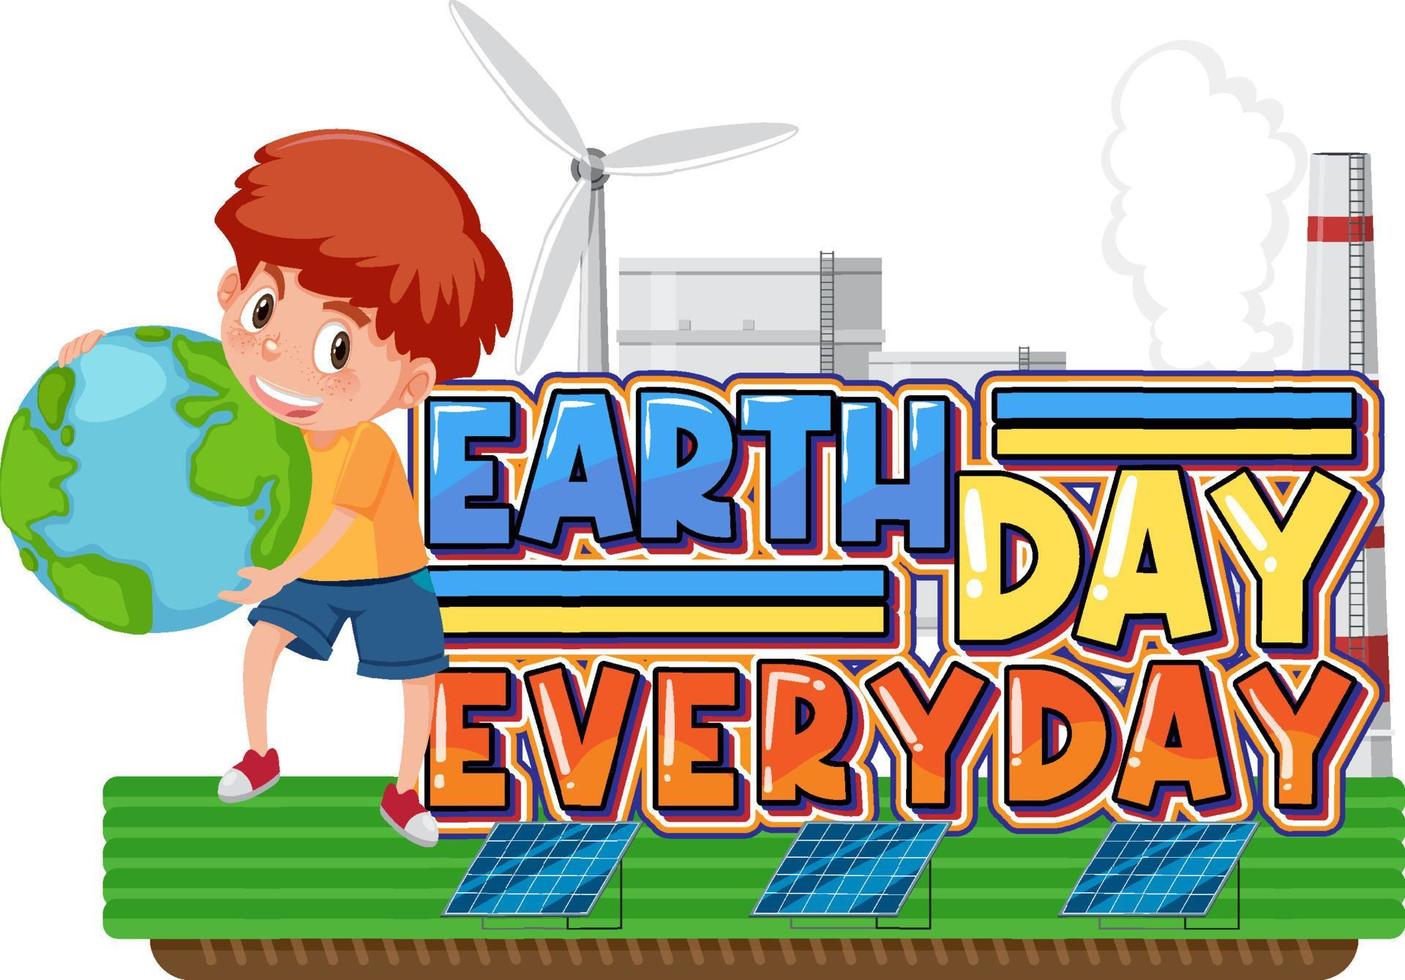 Earth Day Every Day banner design vector